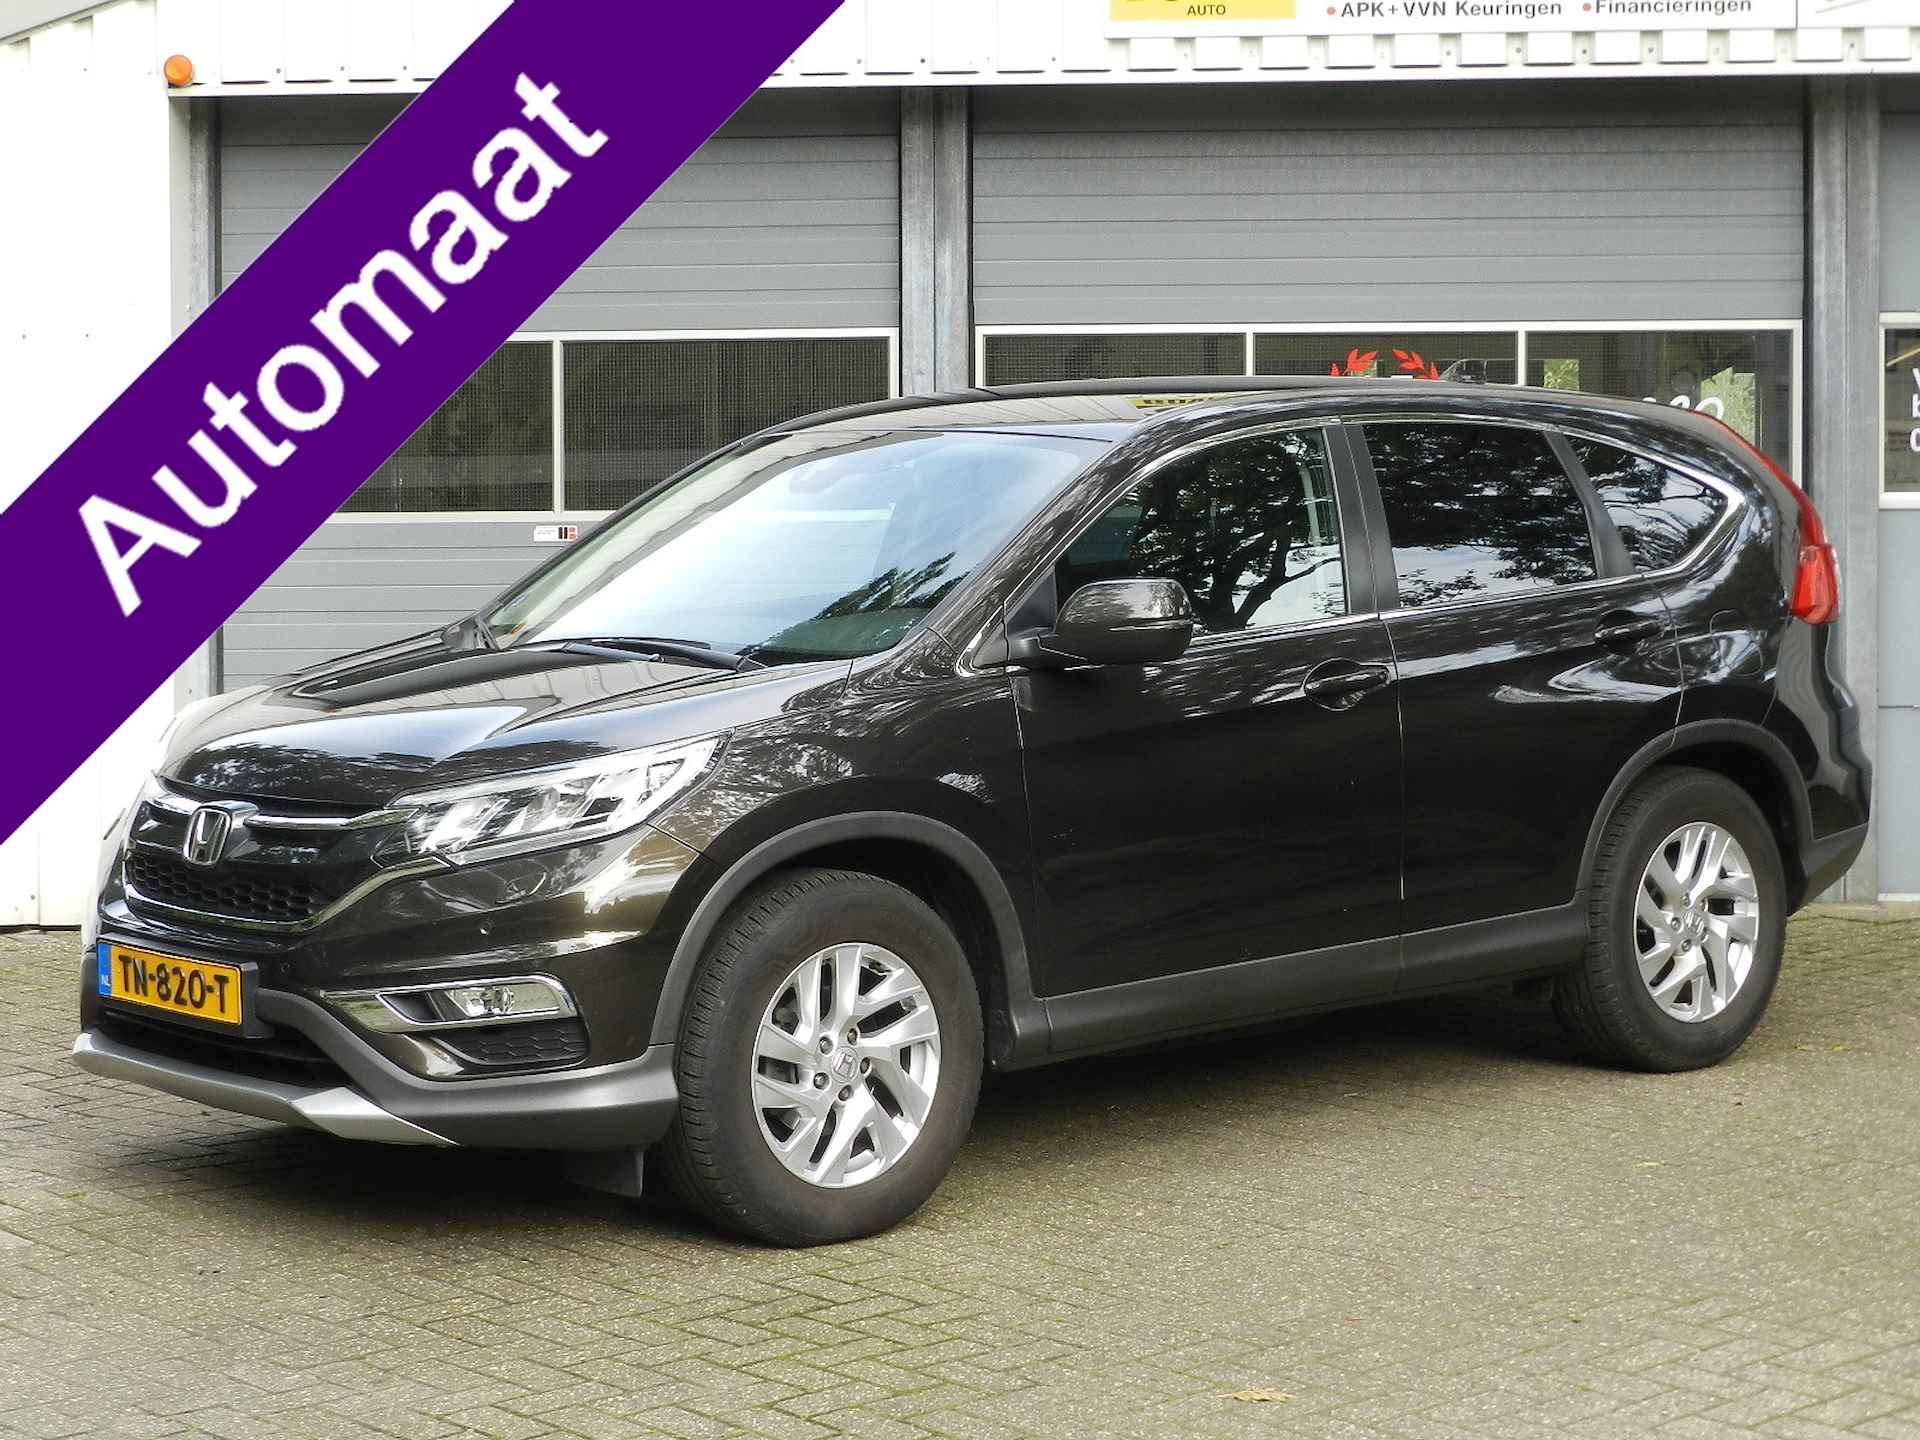 Honda CR-V 2.0 4WD Lifestyle Automaat Climate en Cruise contr PDC Camera - 1/50